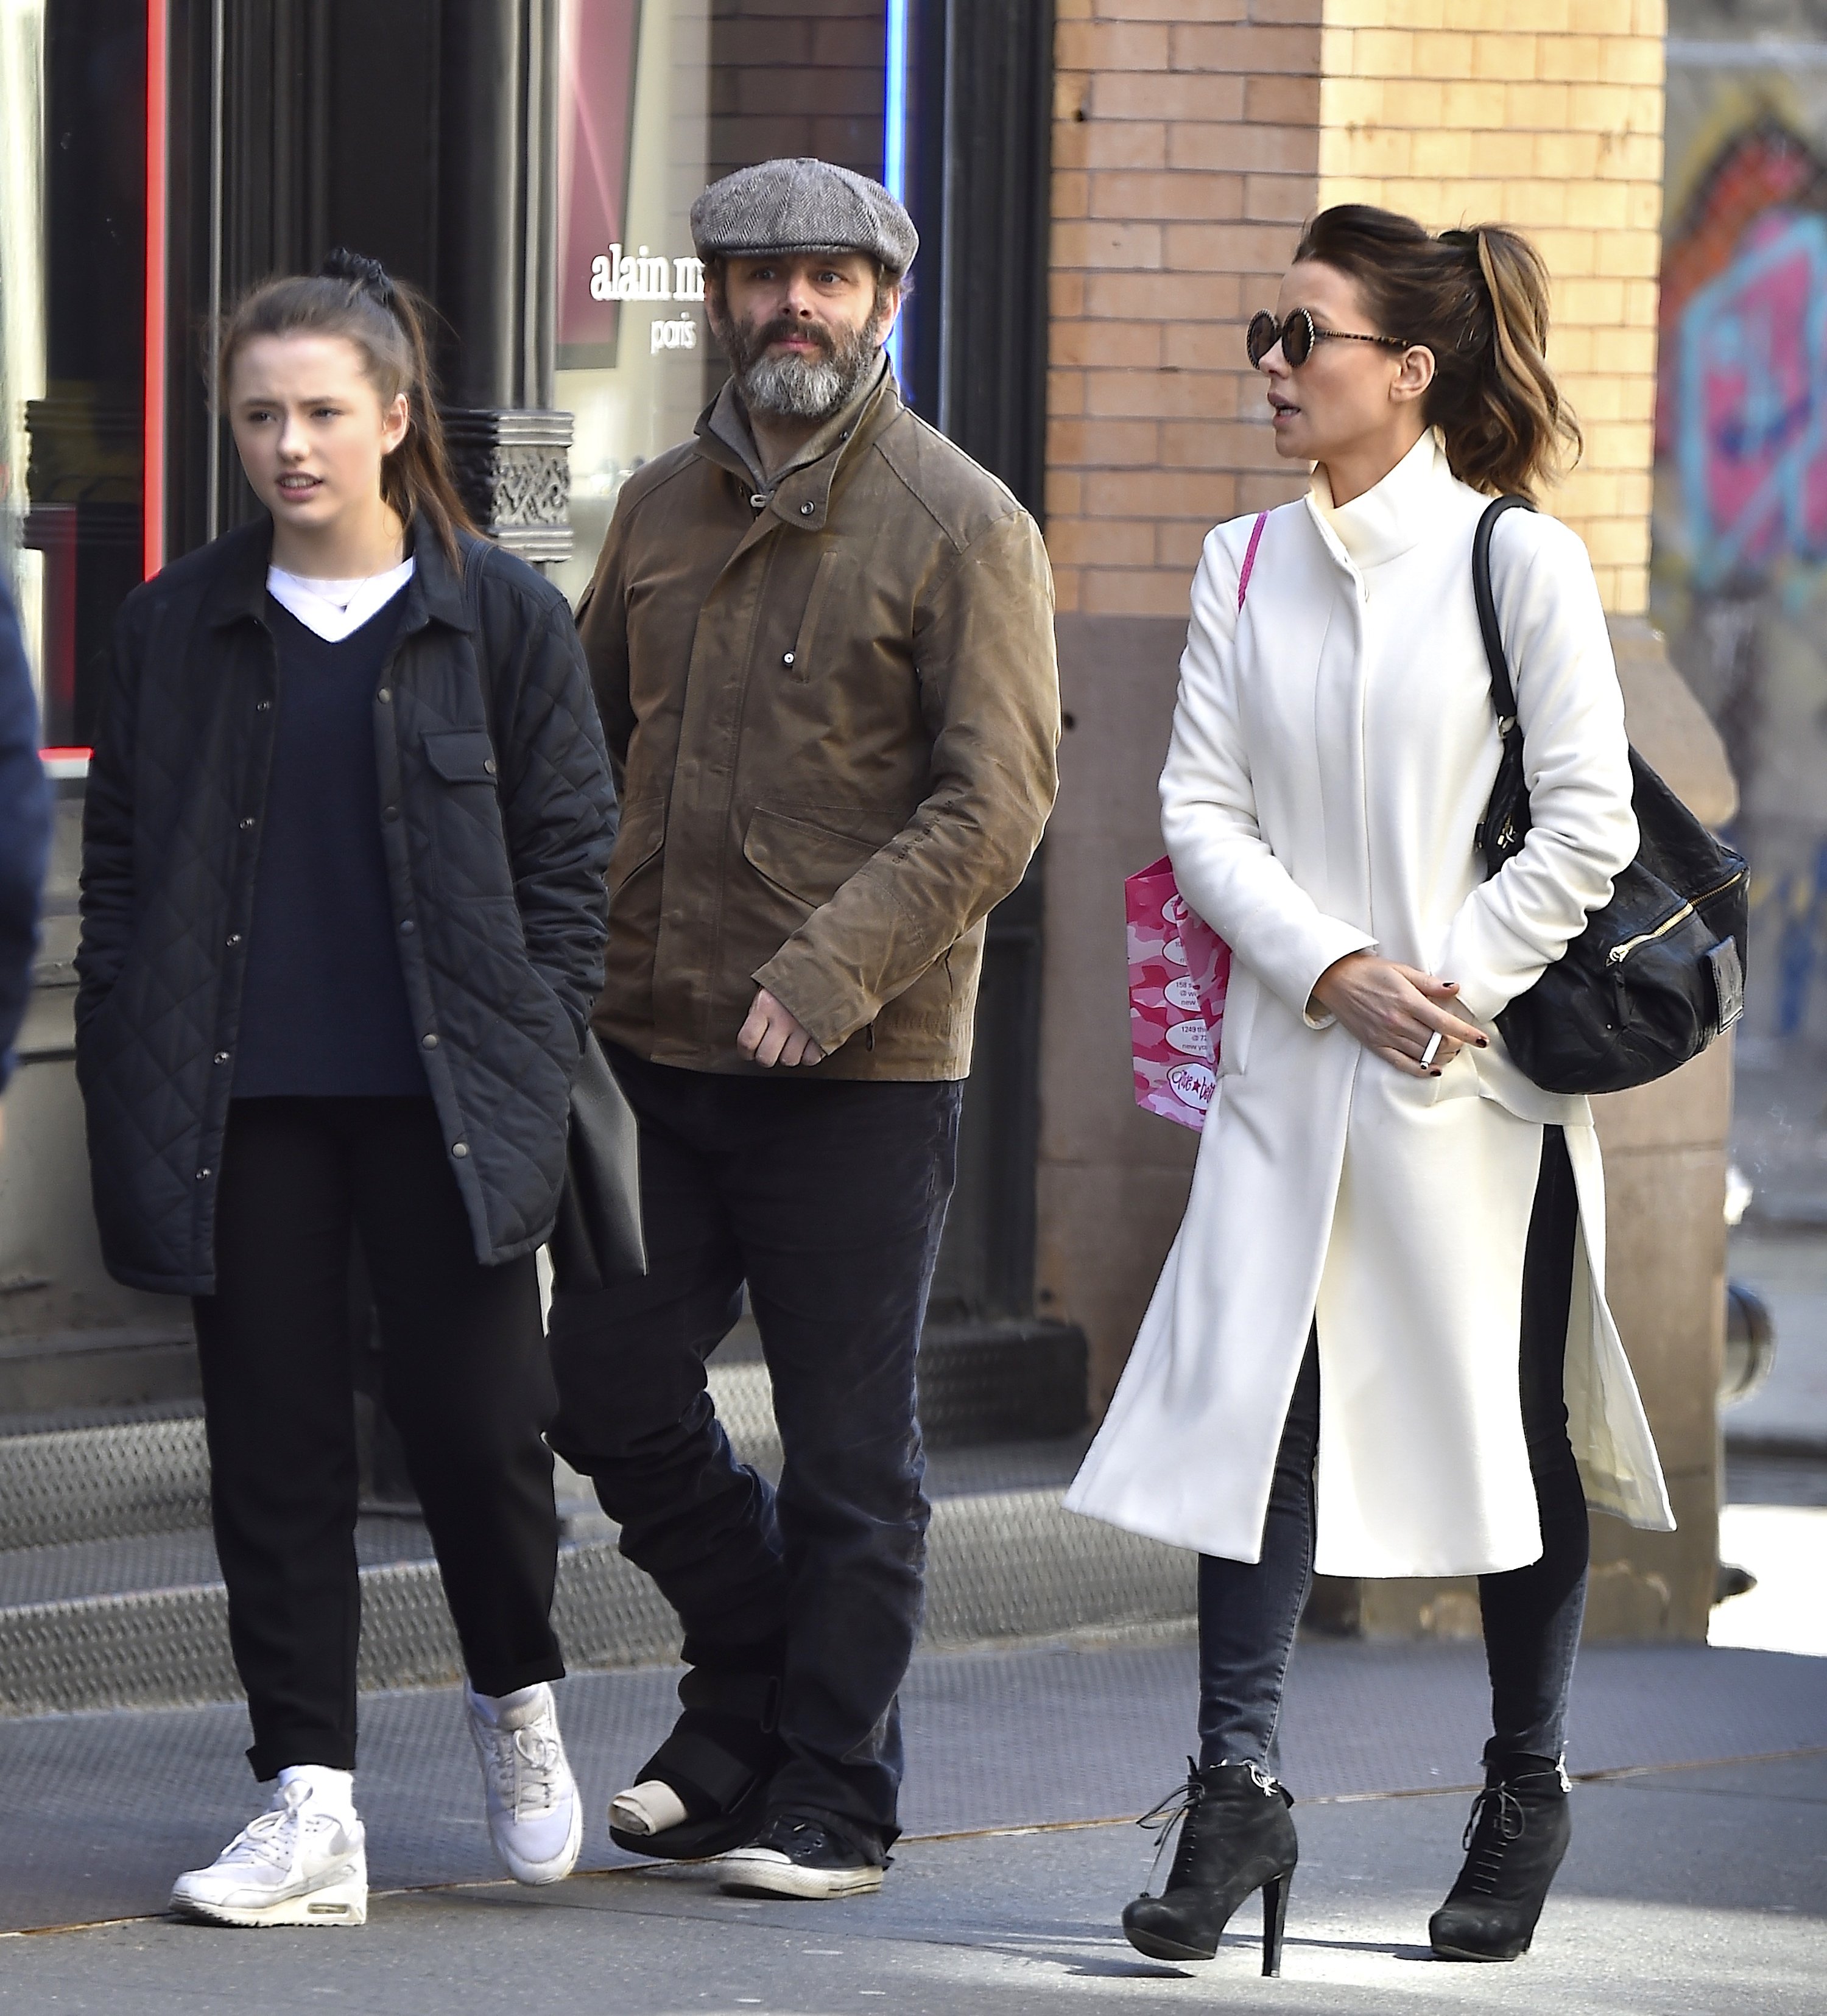 Lily Mo Sheen Is Also an Actress like Her Parents - Meet Michael Sheen and Kate Beckinsale’s Daughter